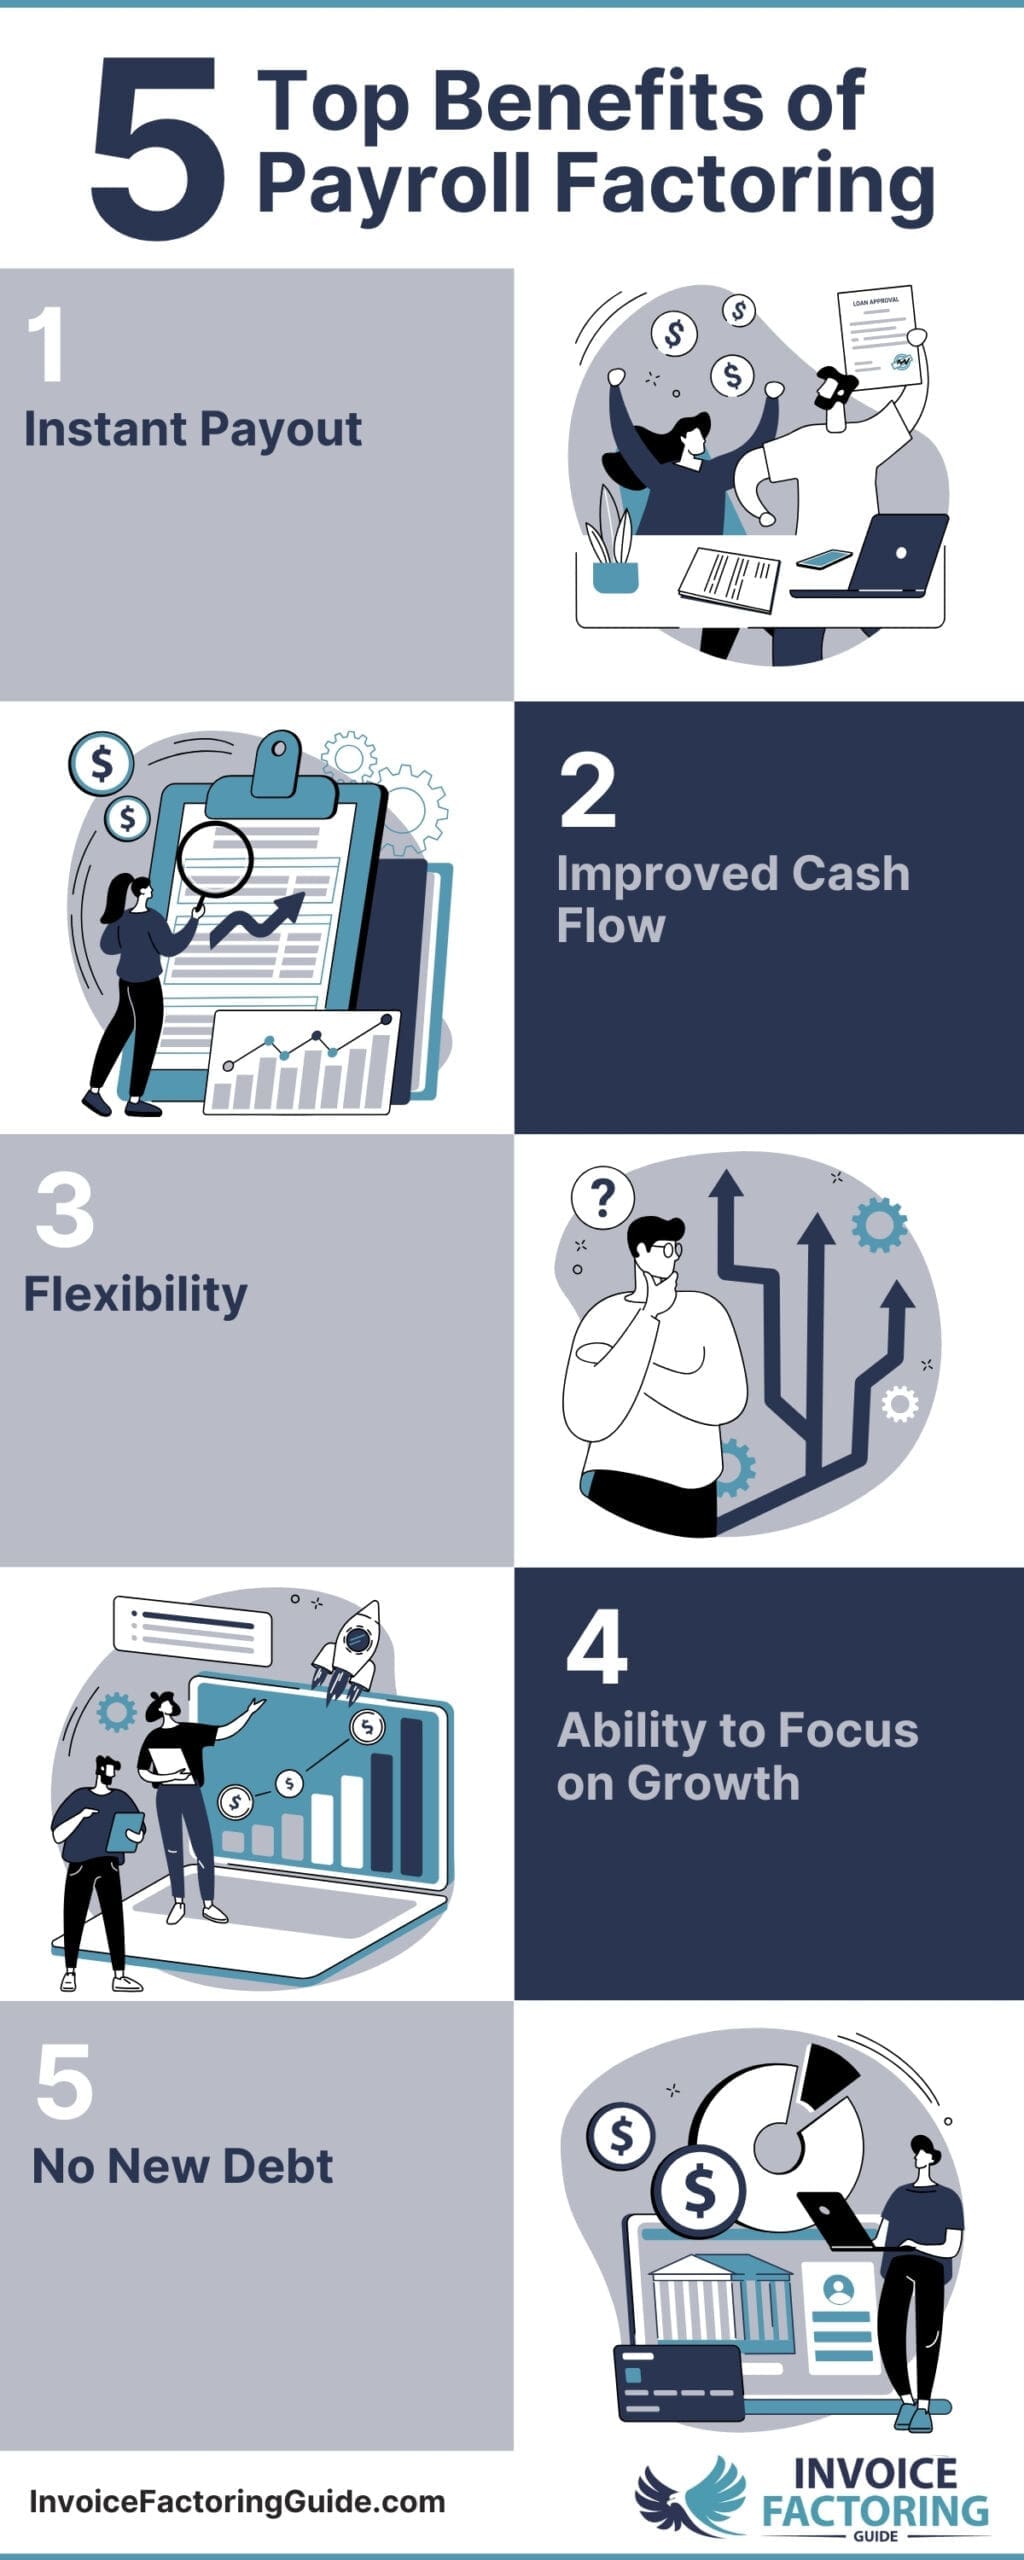 5 Top Benefits of Payroll Factoring Infographic